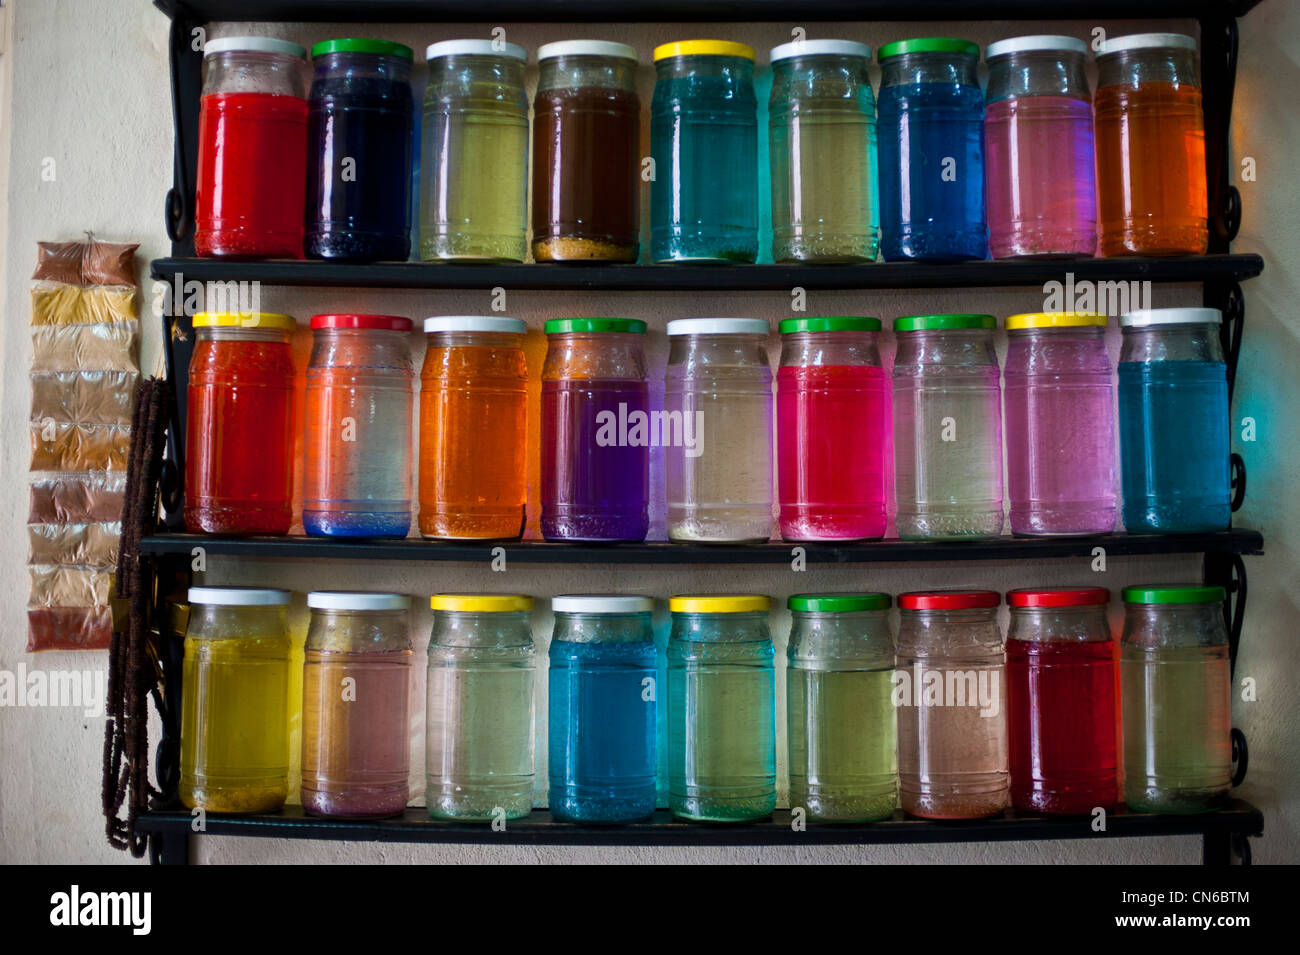 Glass Jars with colourful dyeing liquid. Marrakech, Morocco. Stock Photo